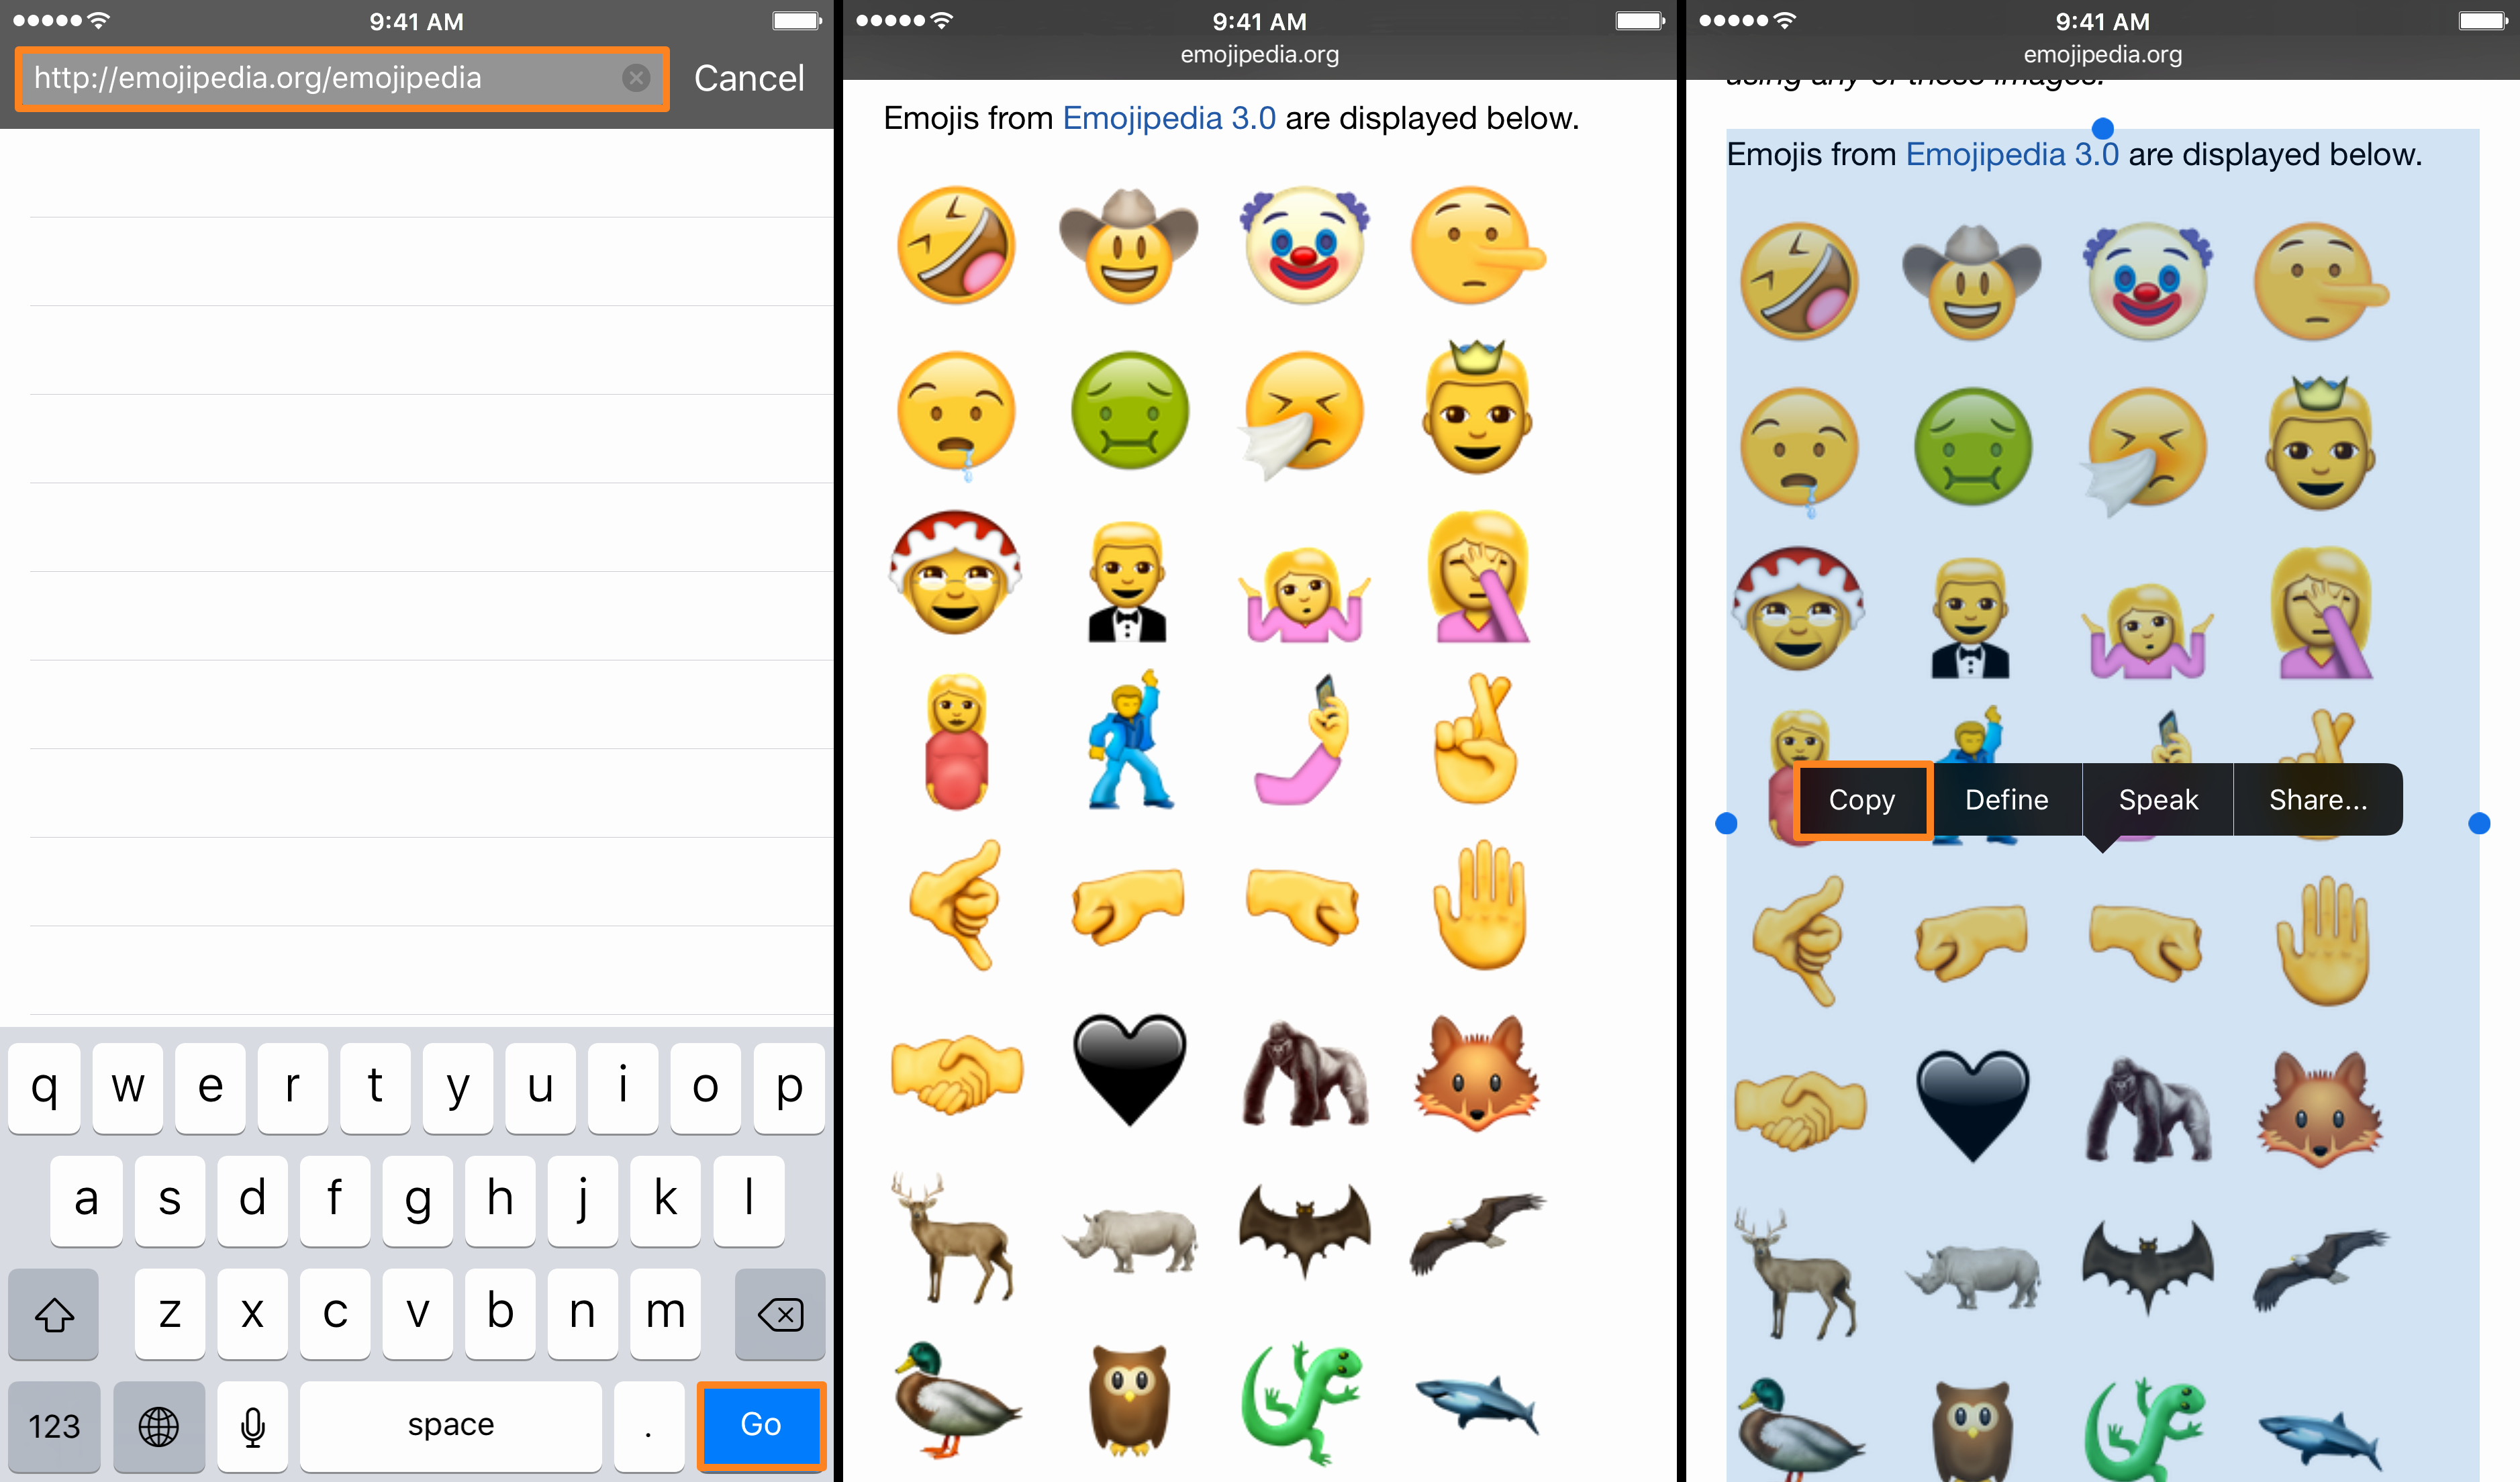 Copy and Paste Emoji Pictures Awesome Enjoy the New Unicode 9 0 Emojis On Ios Right now with A